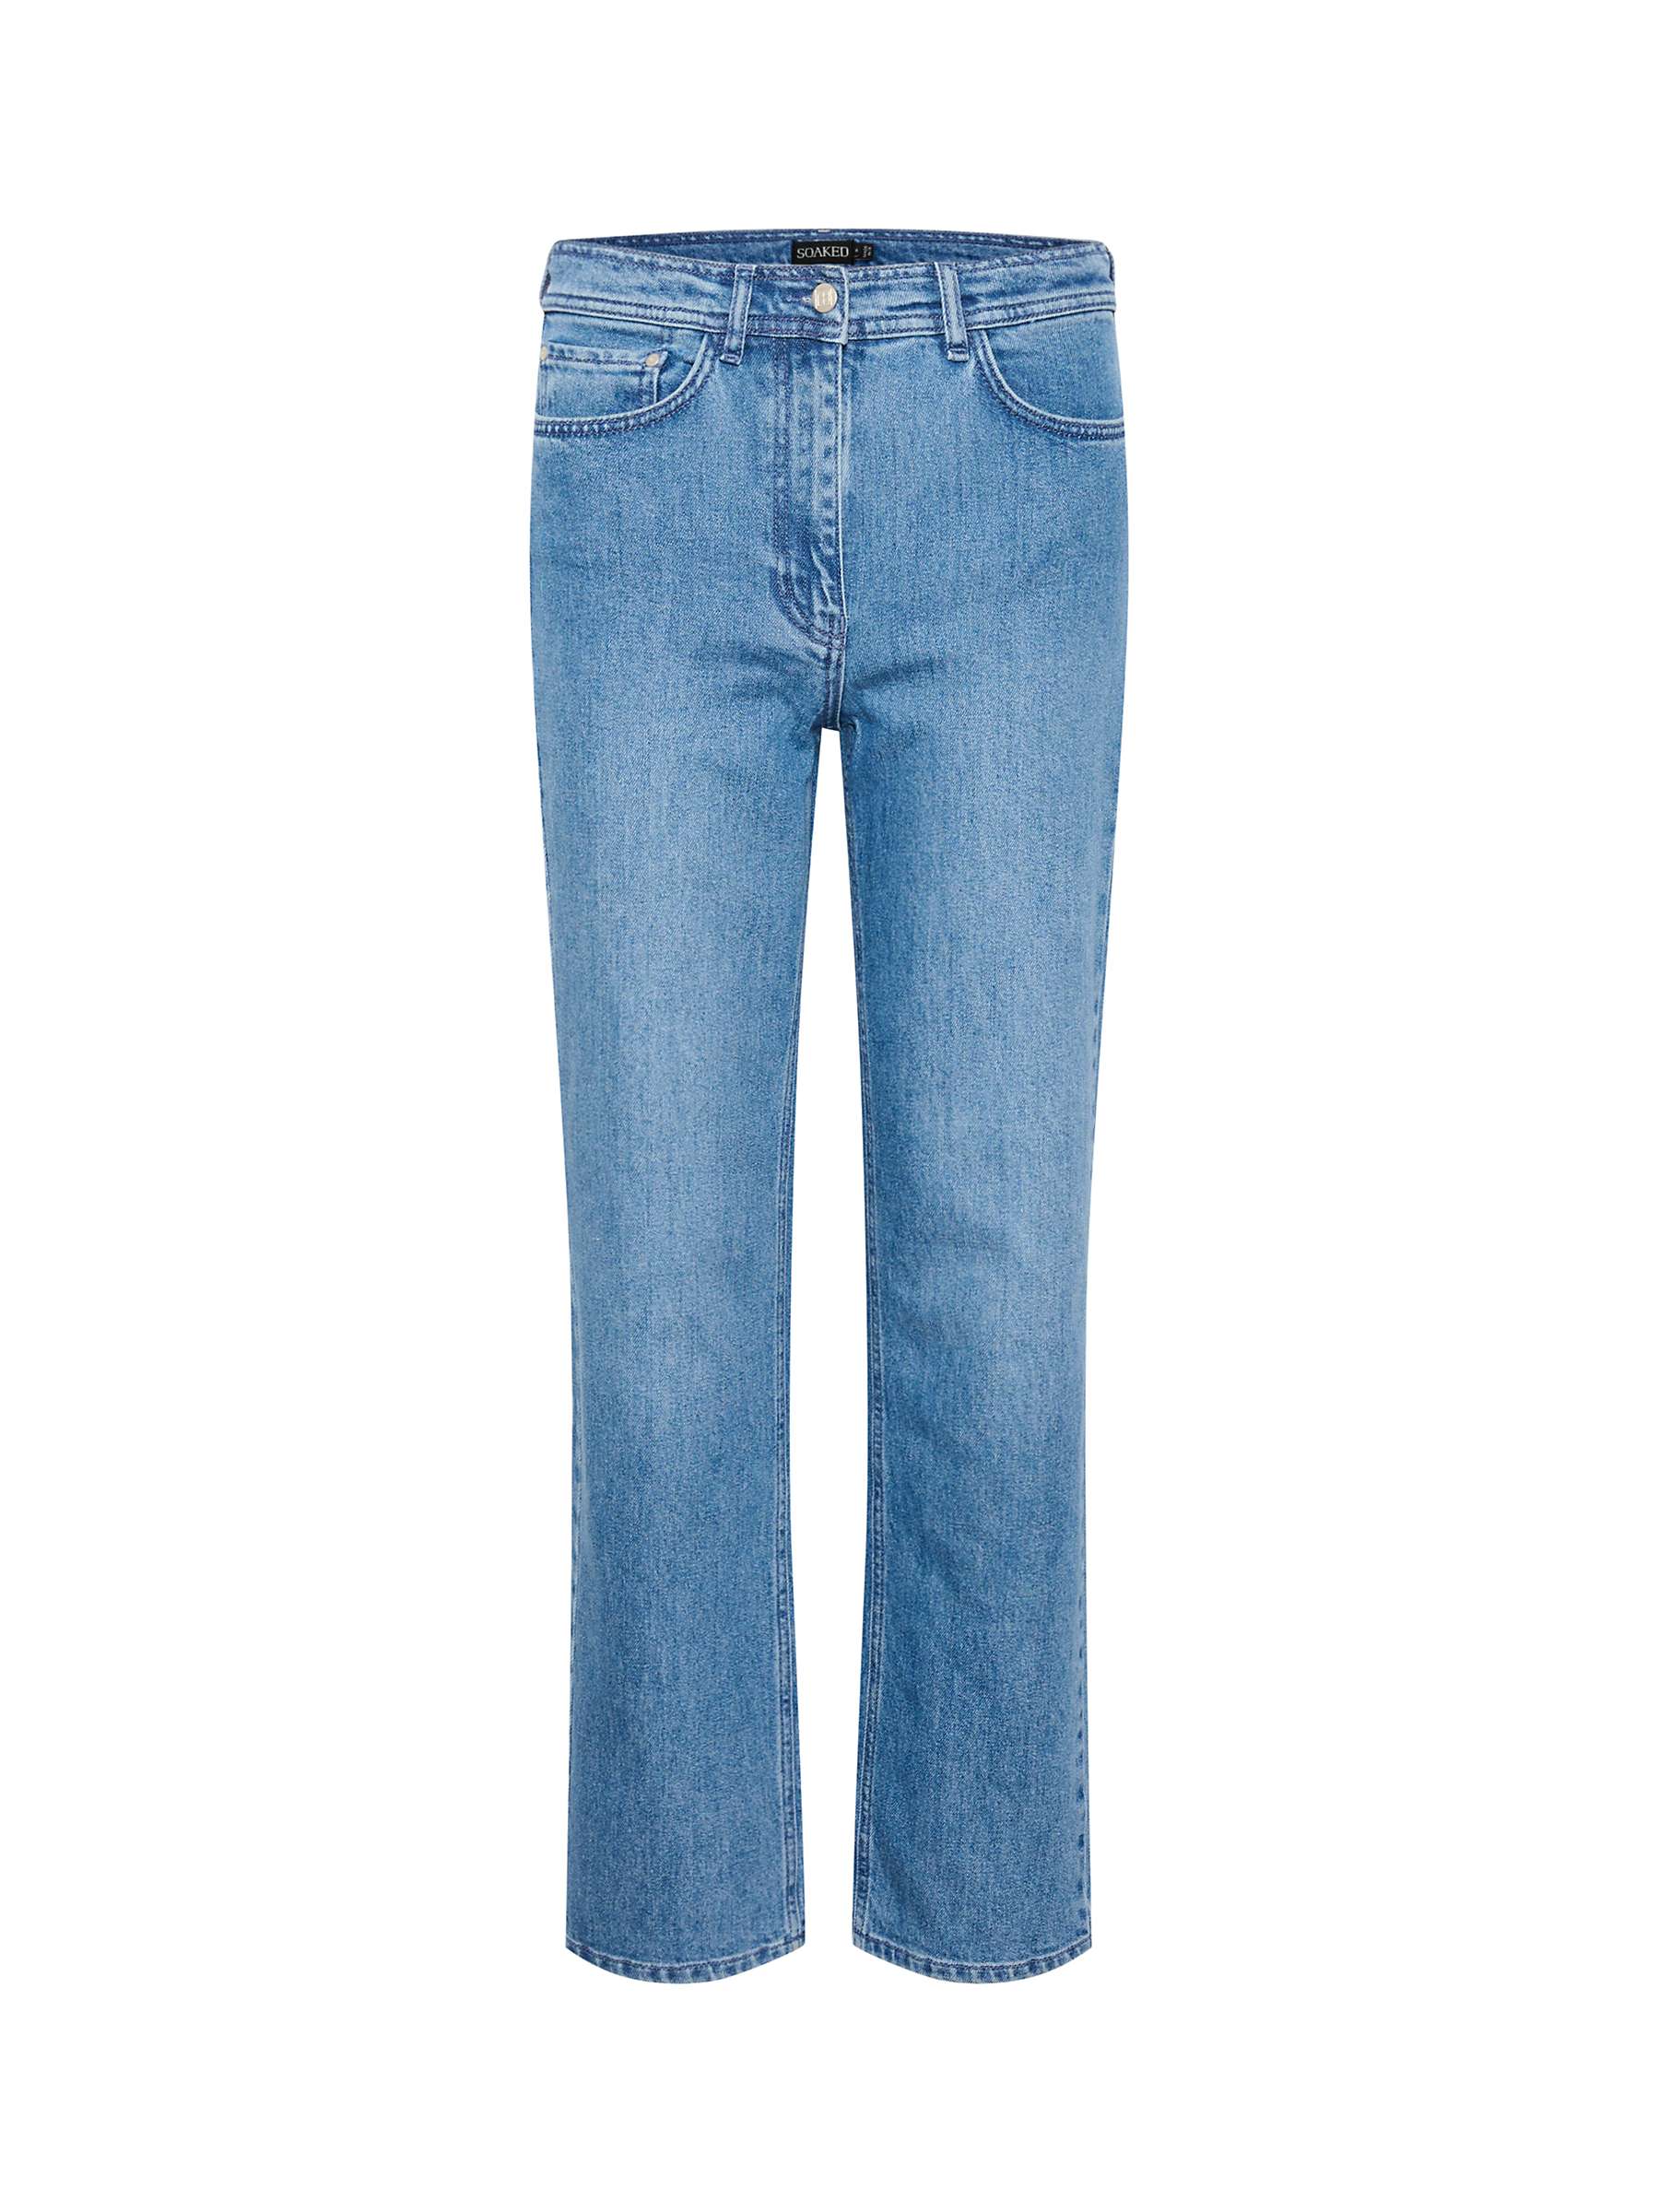 Buy Soaked In Luxury Margot Mid Rise Ankle Grazer Jeans, Classic Blue Online at johnlewis.com